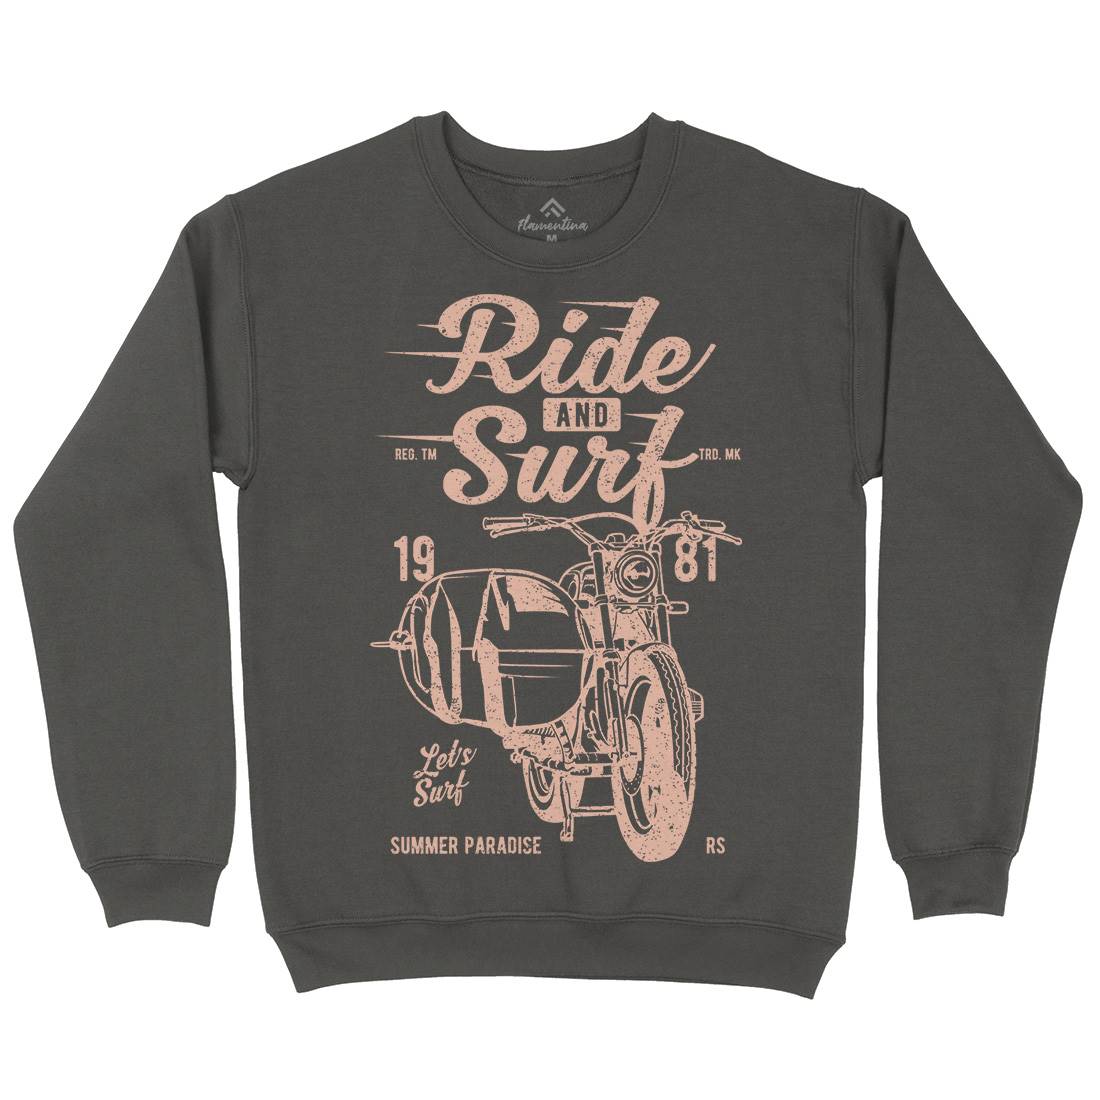 Ride And Mens Crew Neck Sweatshirt Surf A742